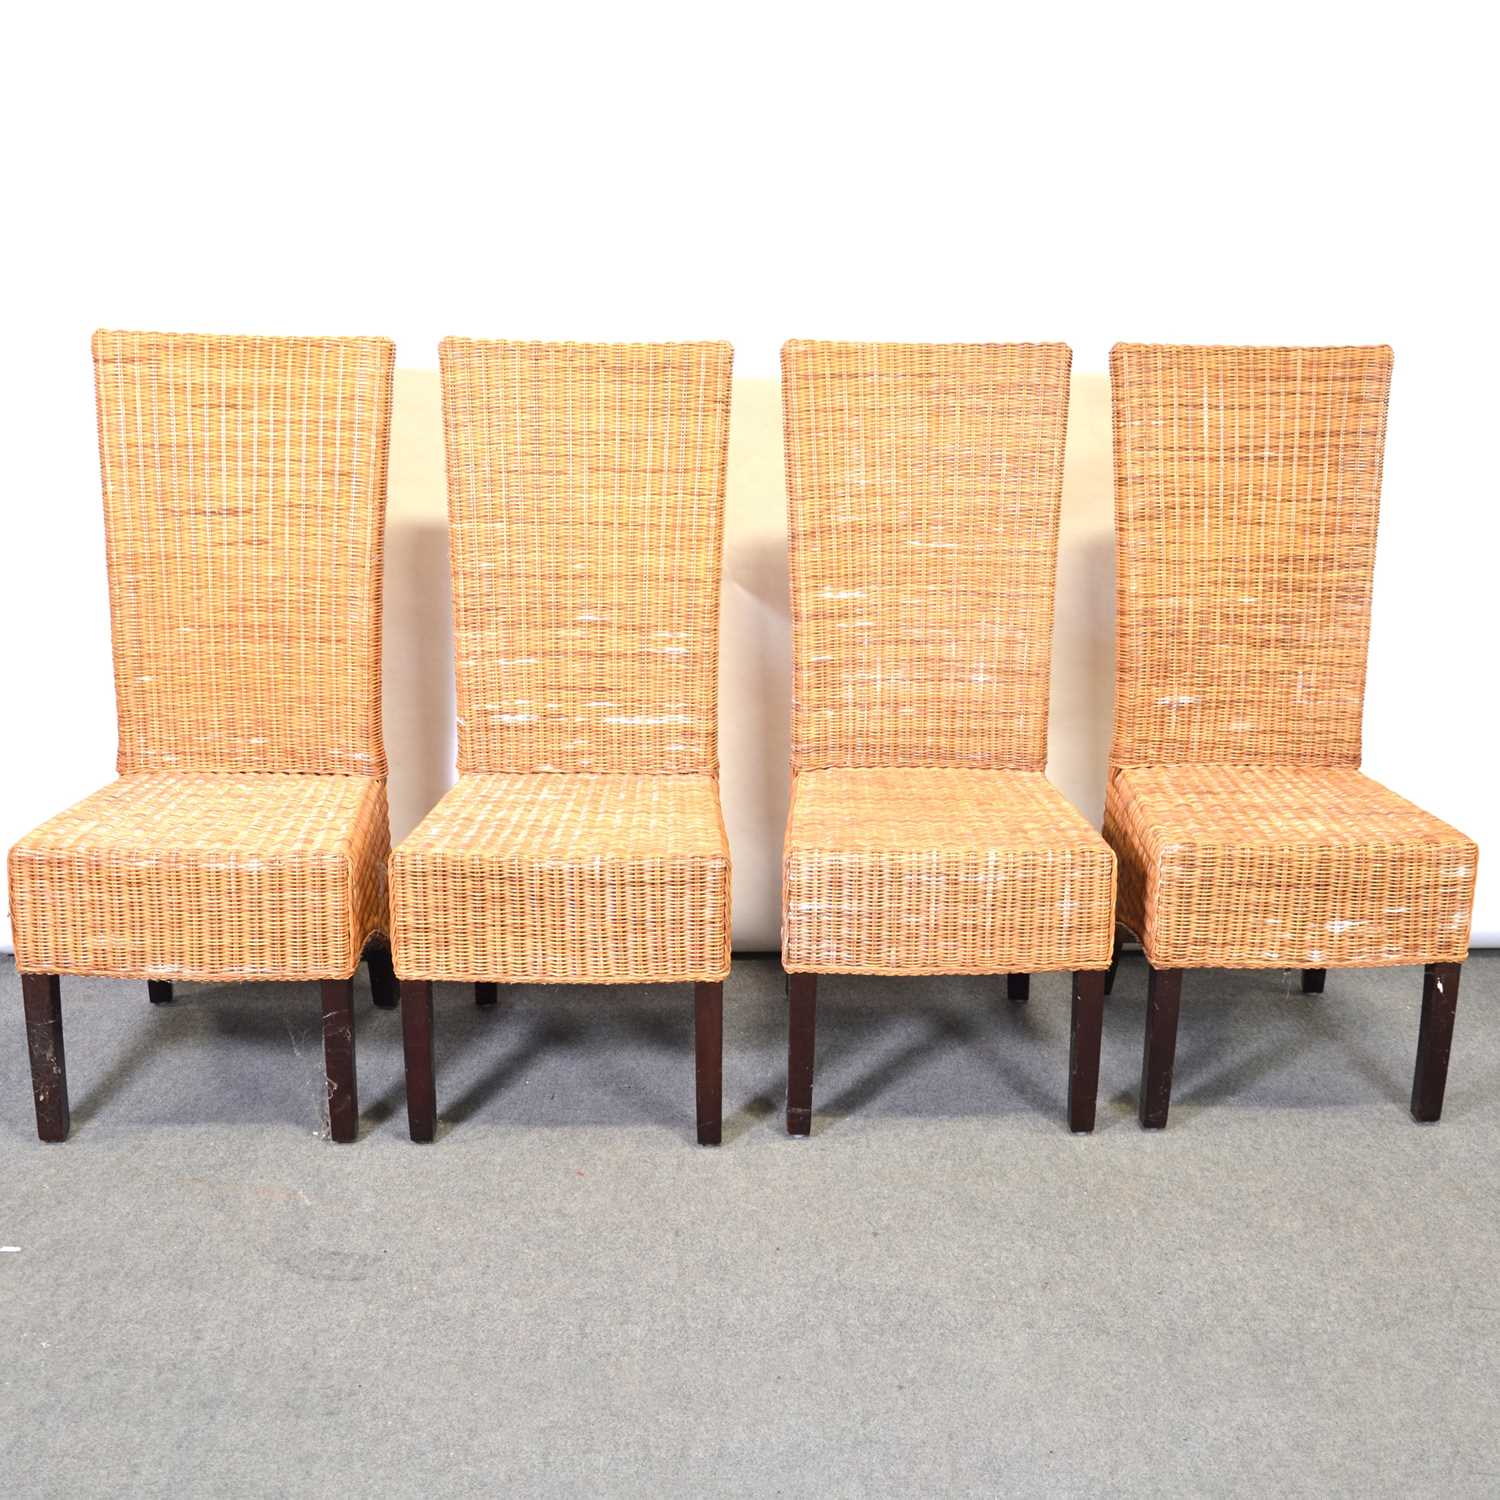 Lot 88 - Six contemporary wicker high-back chairs